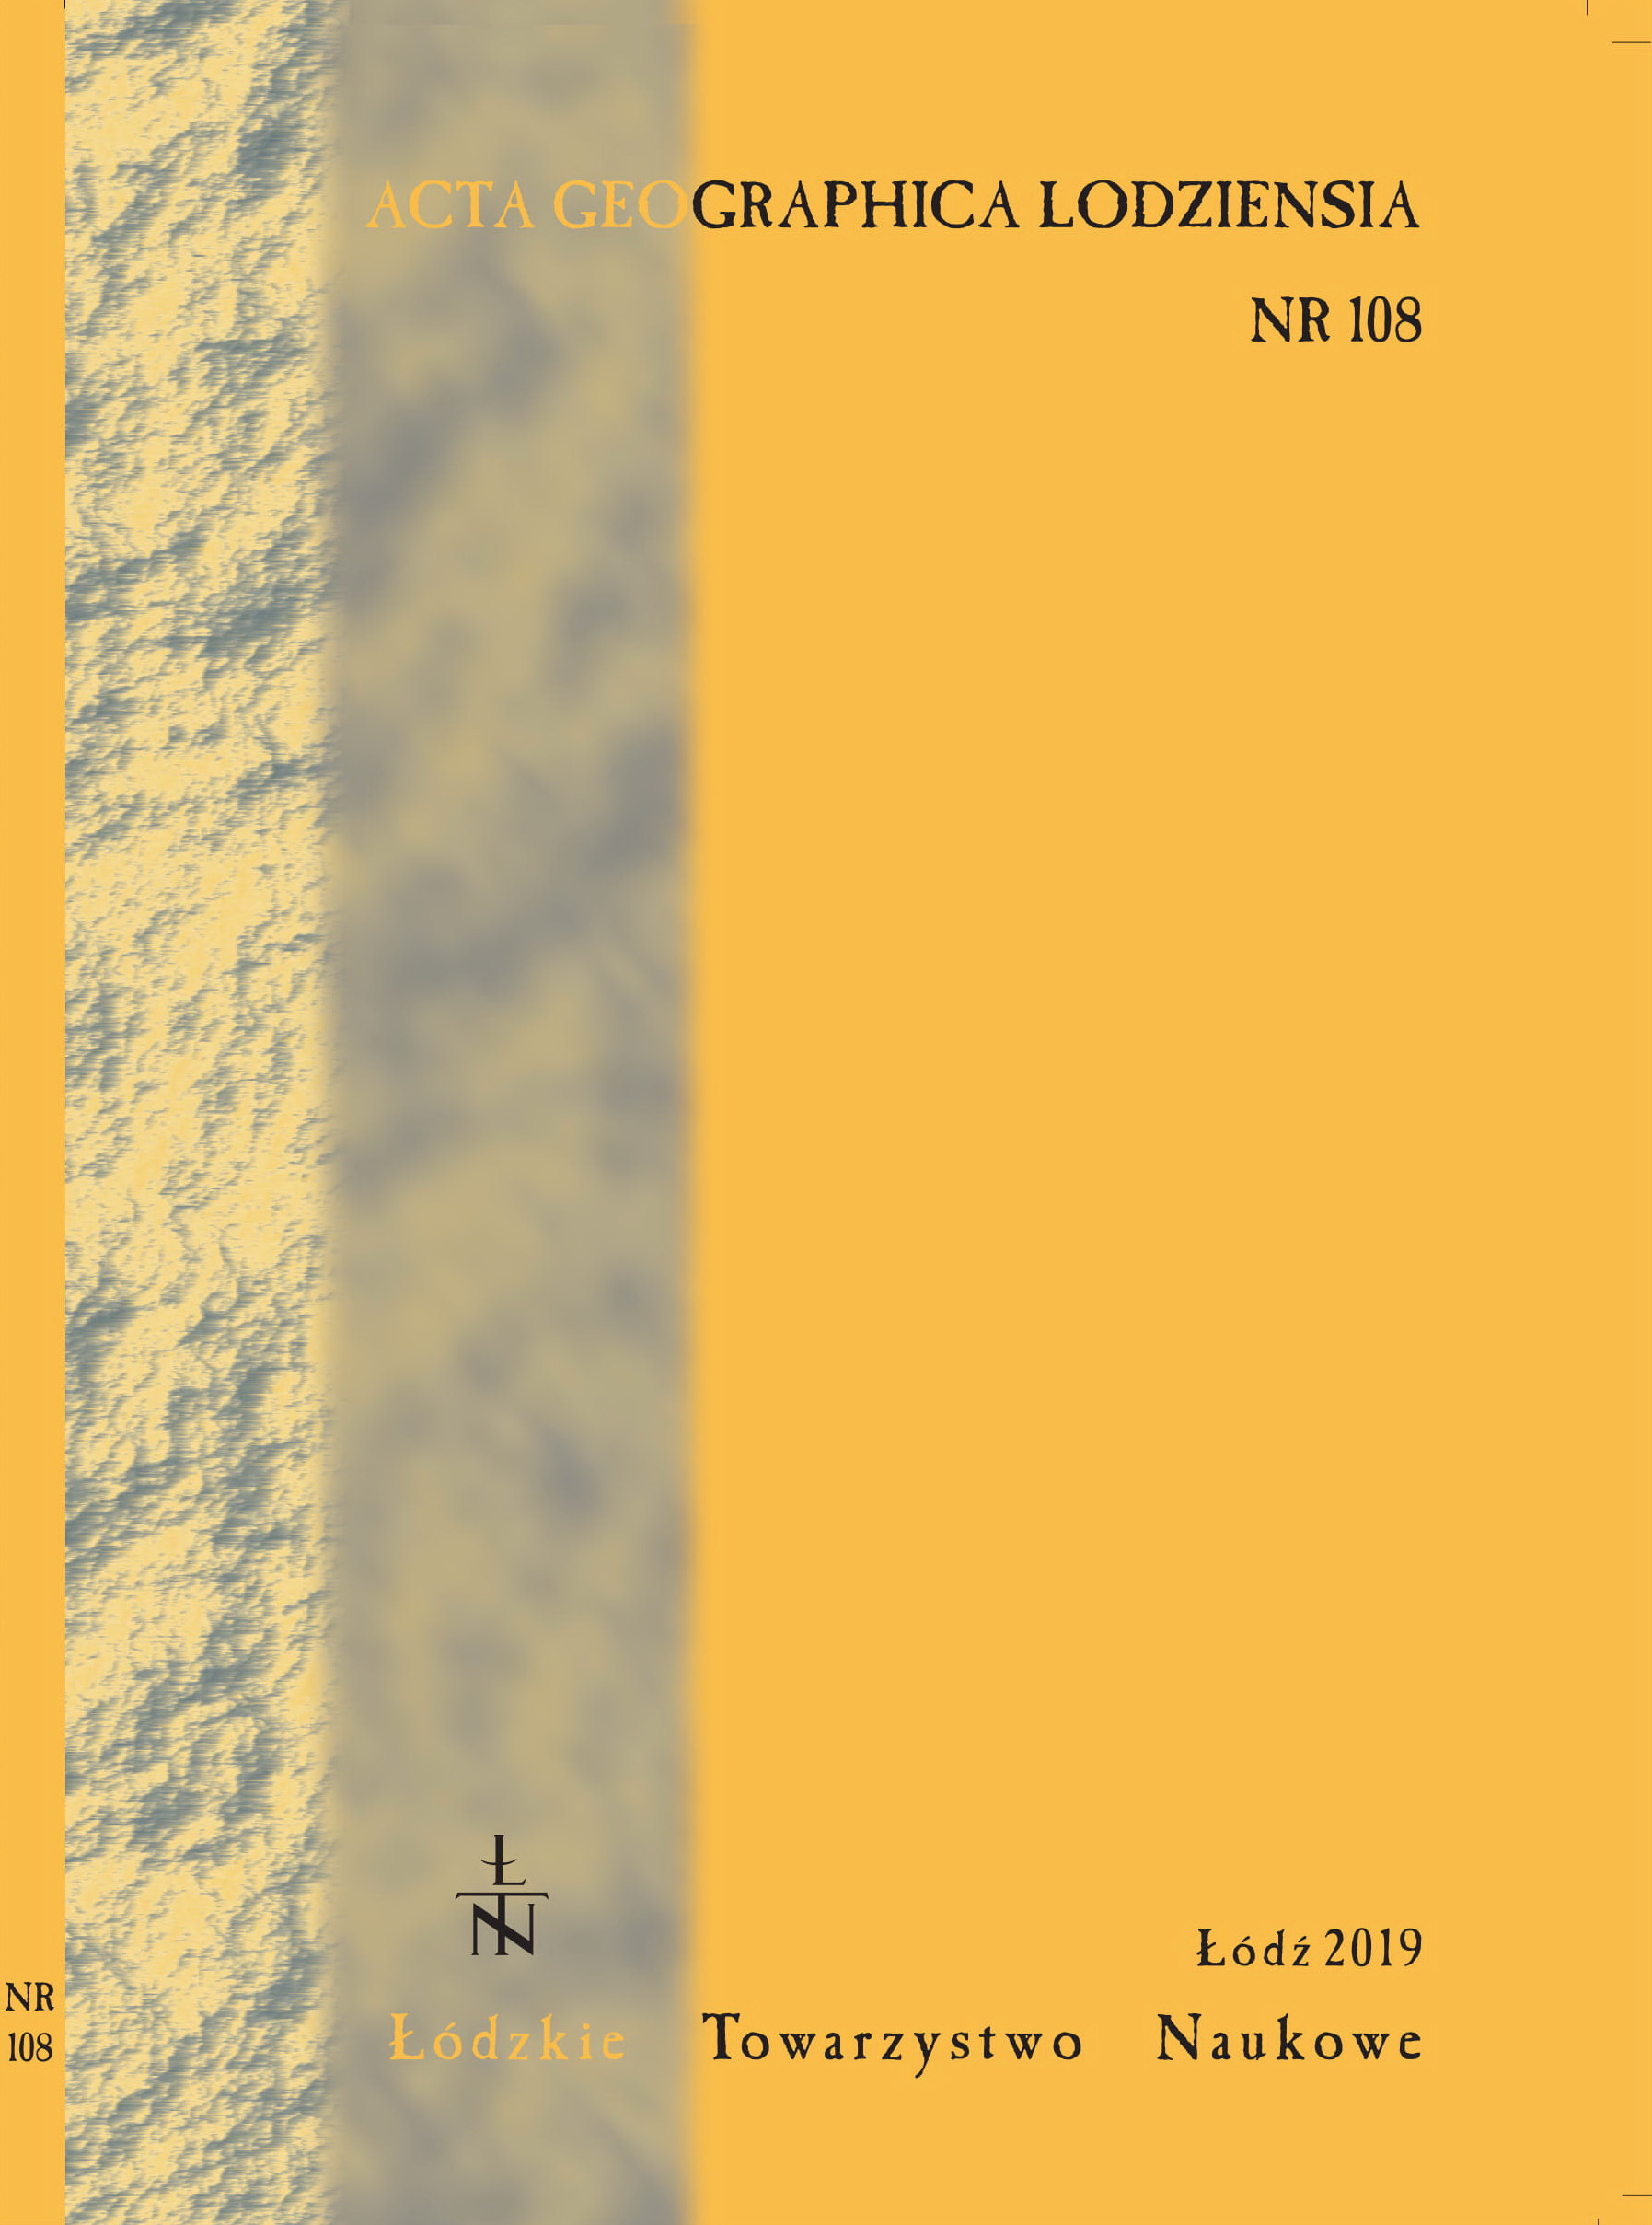 The State of Poznań climate research with particular focus on the air temperature and urban heat island phenomenon Cover Image